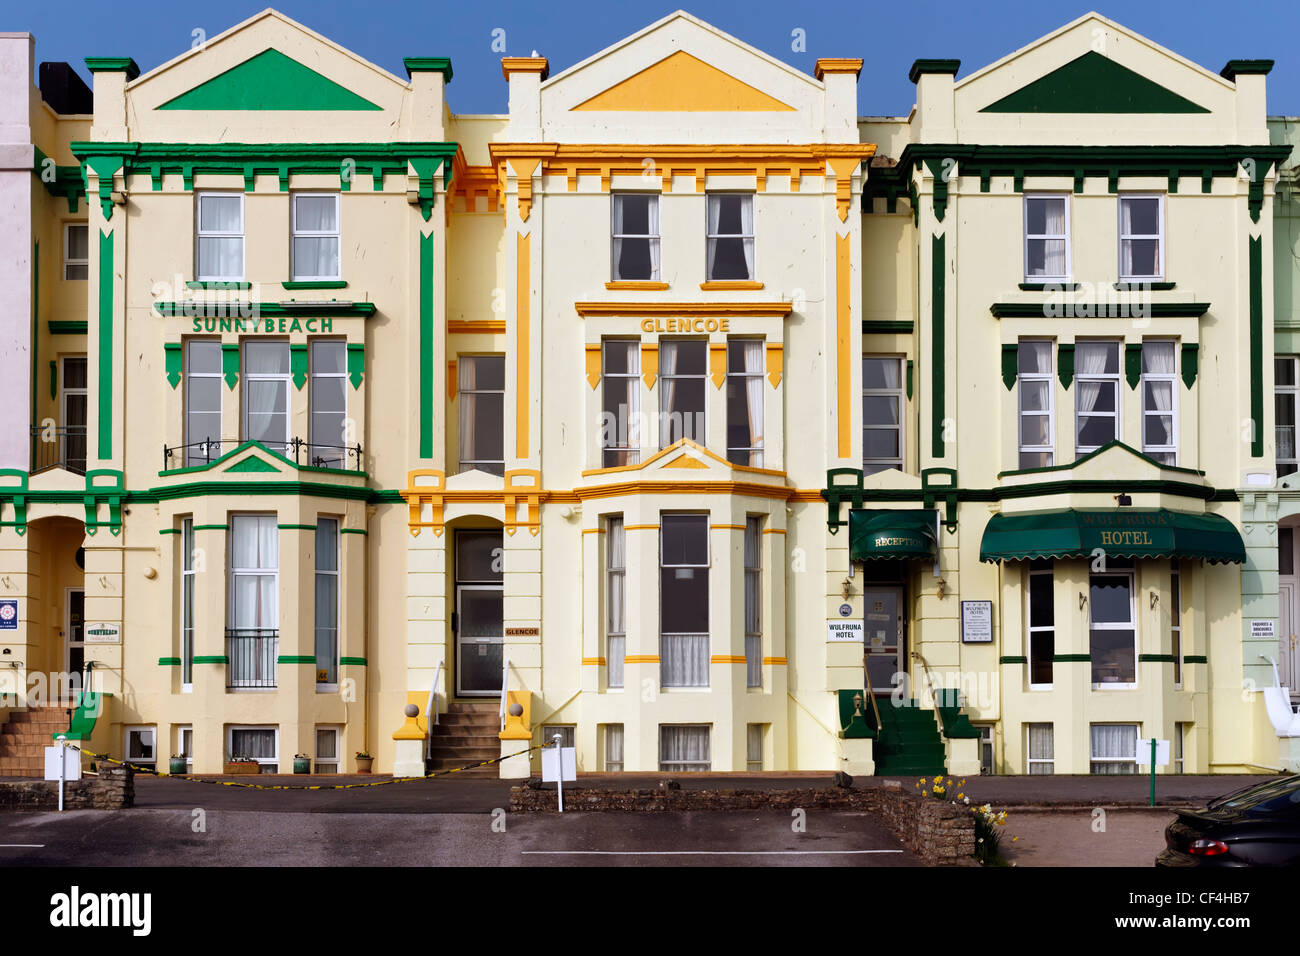 Colourful hotels on the seafront at Paignton on the English Riviera. Stock Photo